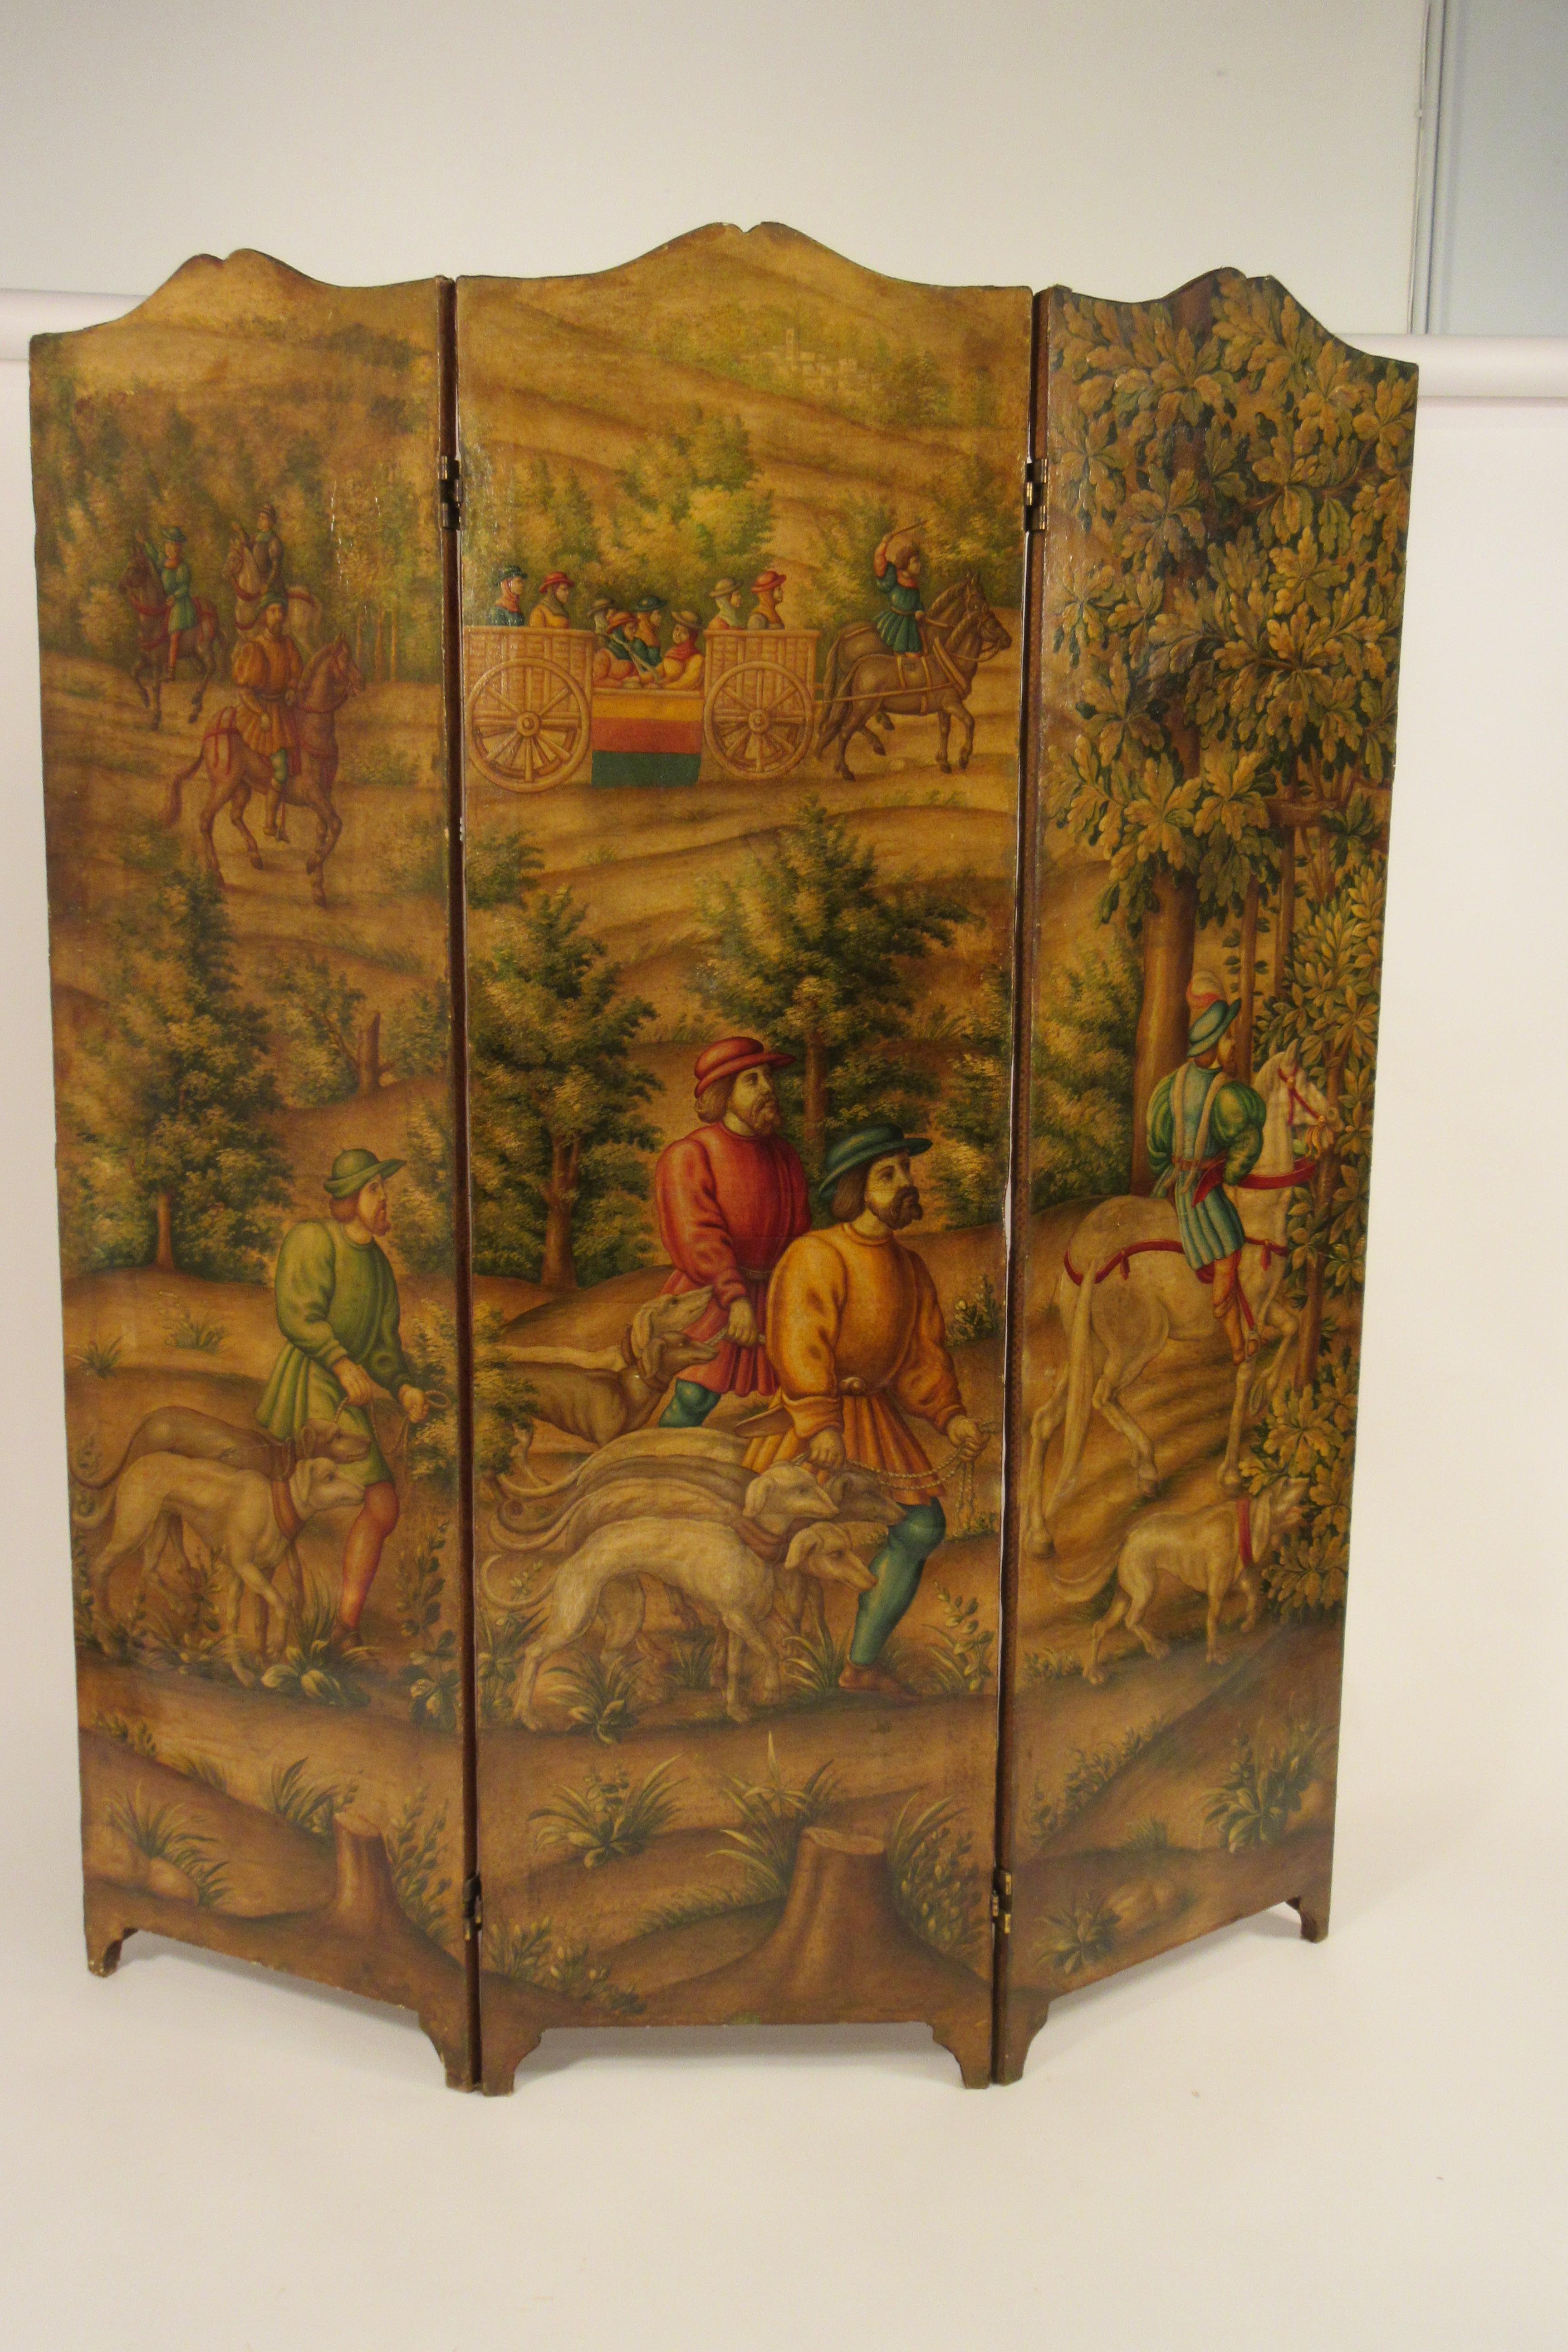 1870s Italian painted 3 panel screen of hunters on horses with dogs. Each panels width is 20”.